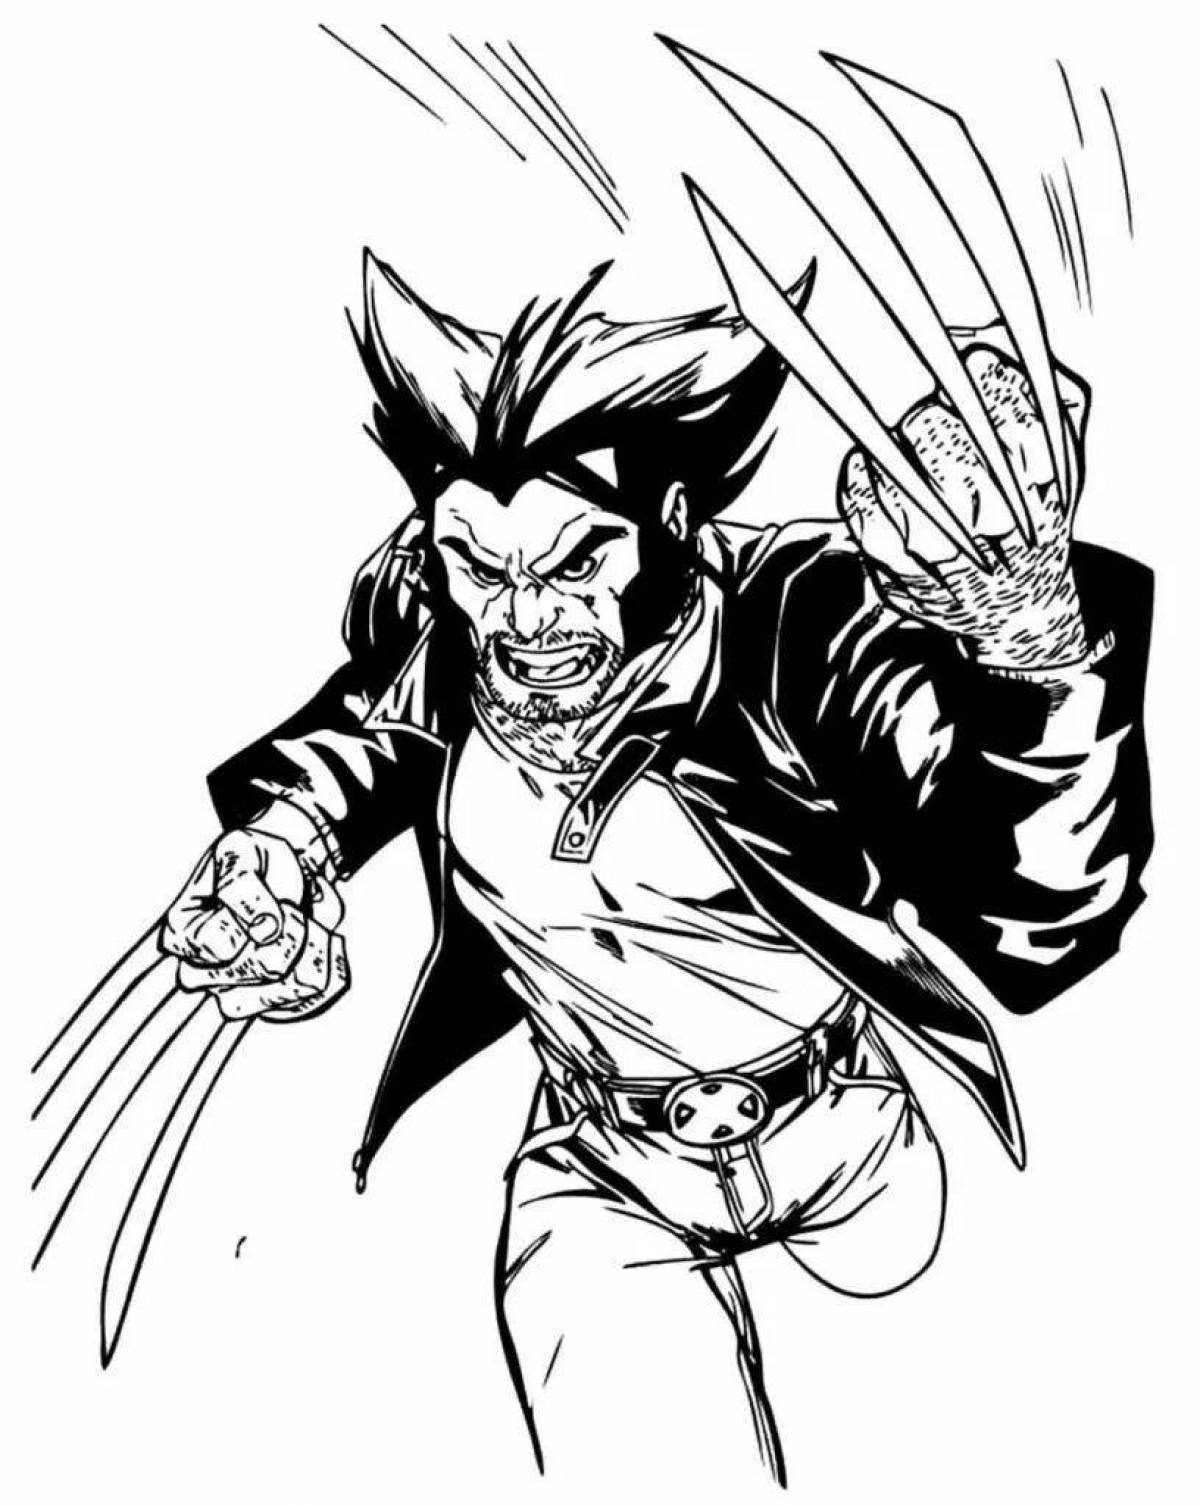 Wolverine coloring book for kids